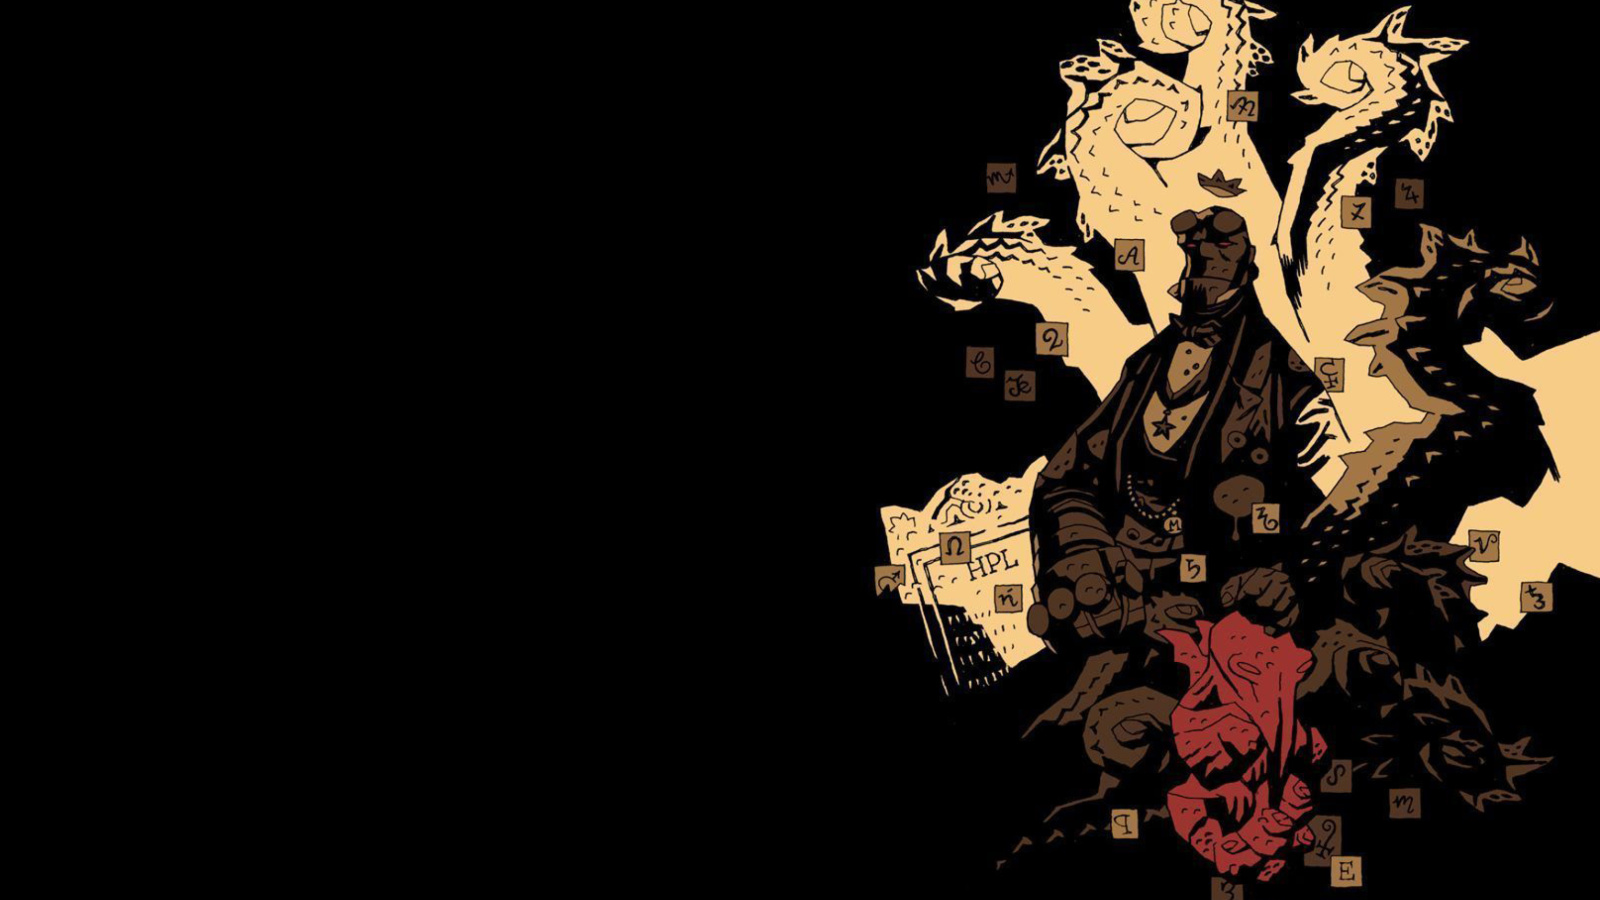 Hellboy The First 20 Years wallpaper 1600x900